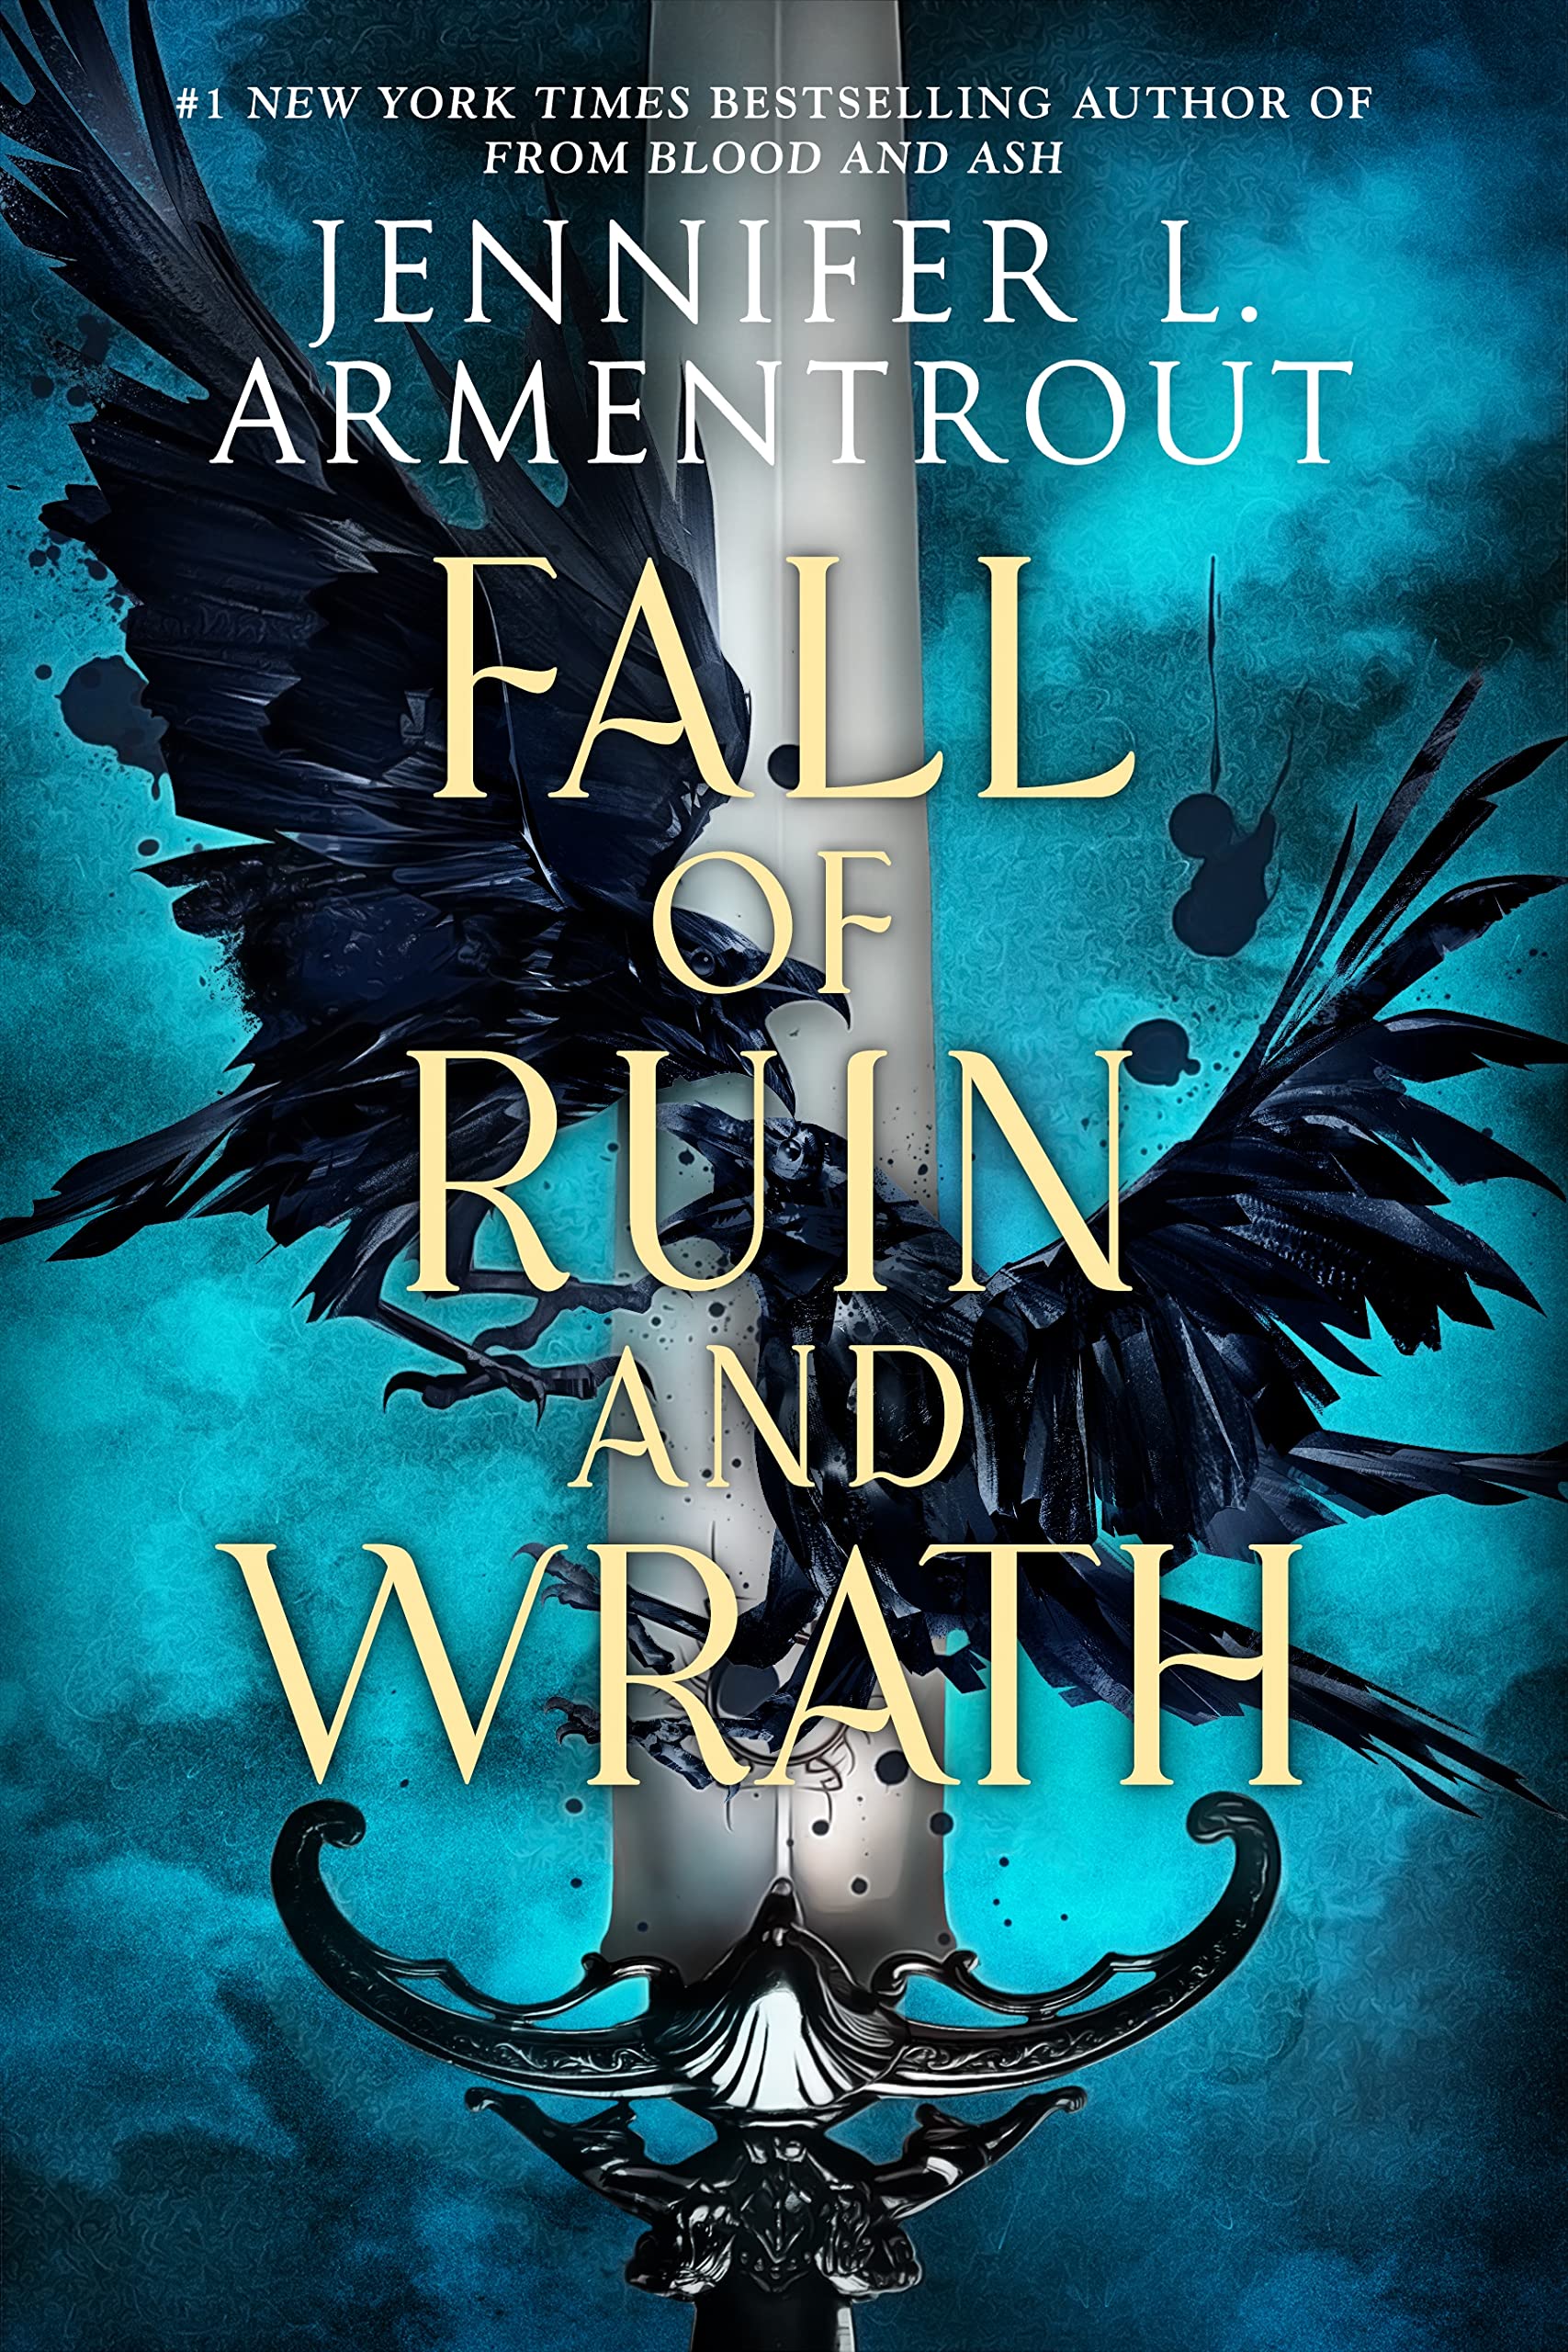 Image for "Fall of Ruin and Wrath"